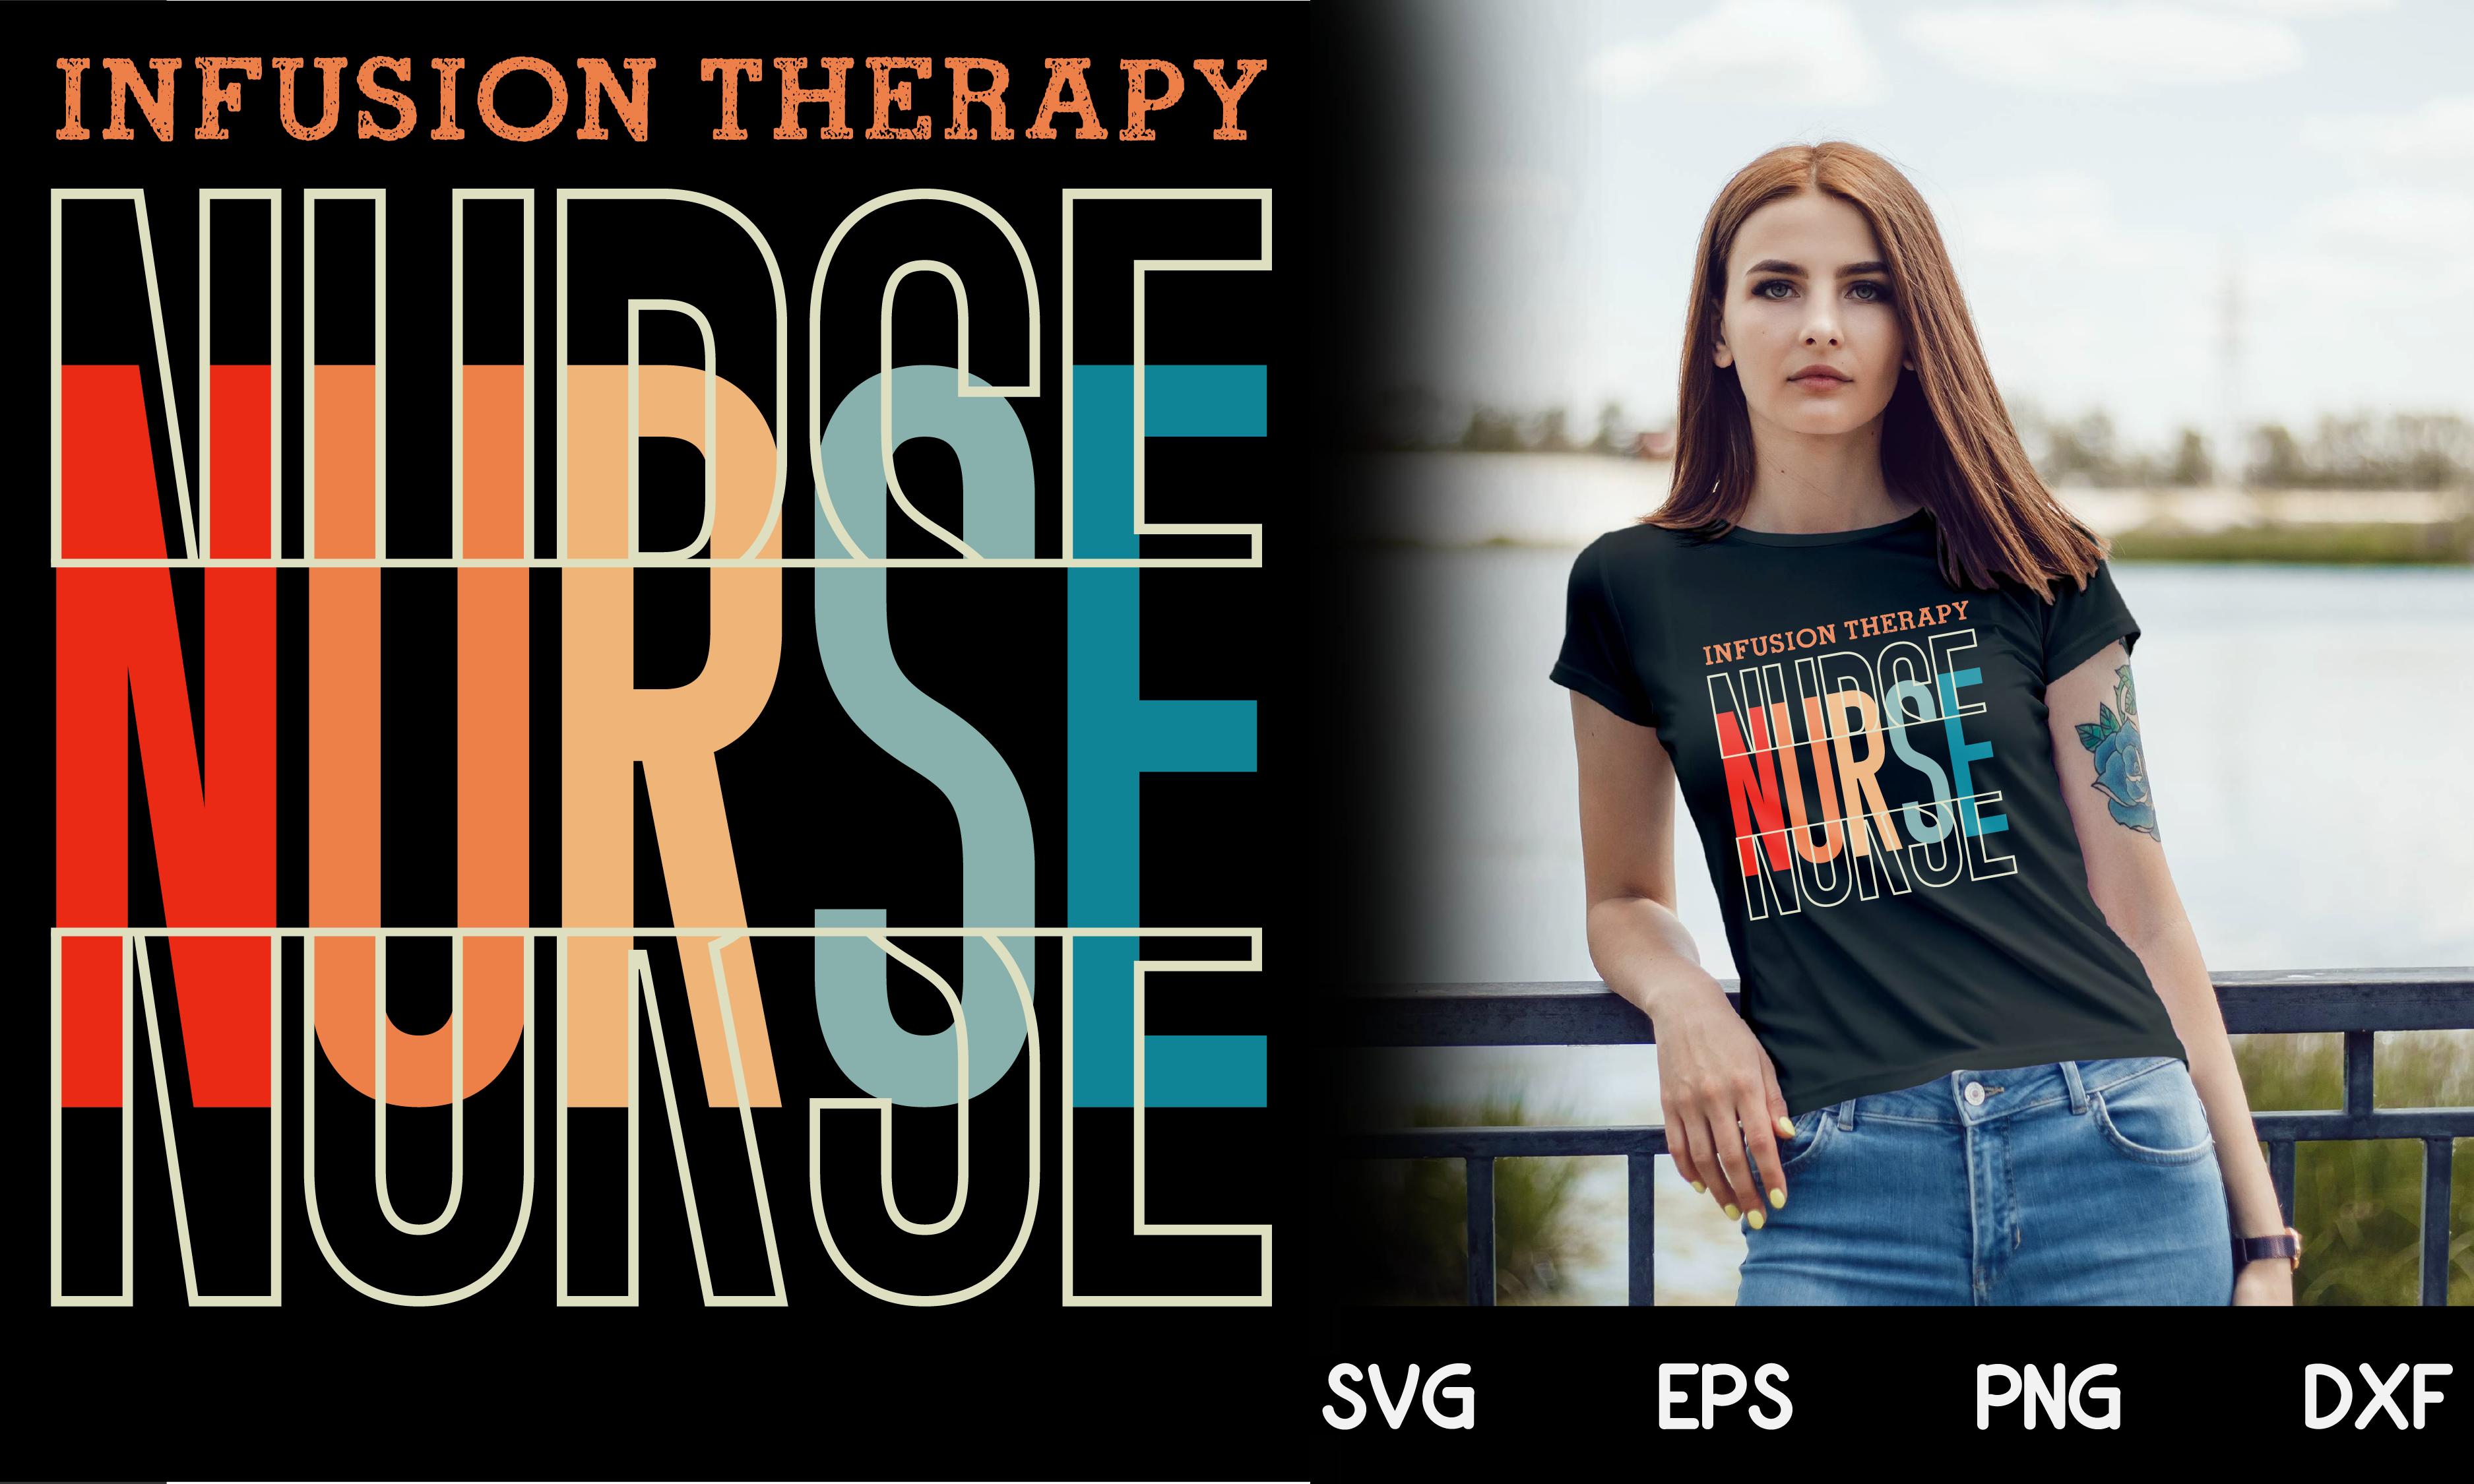 Infusion Therapy Nurse Vintage T Shirt